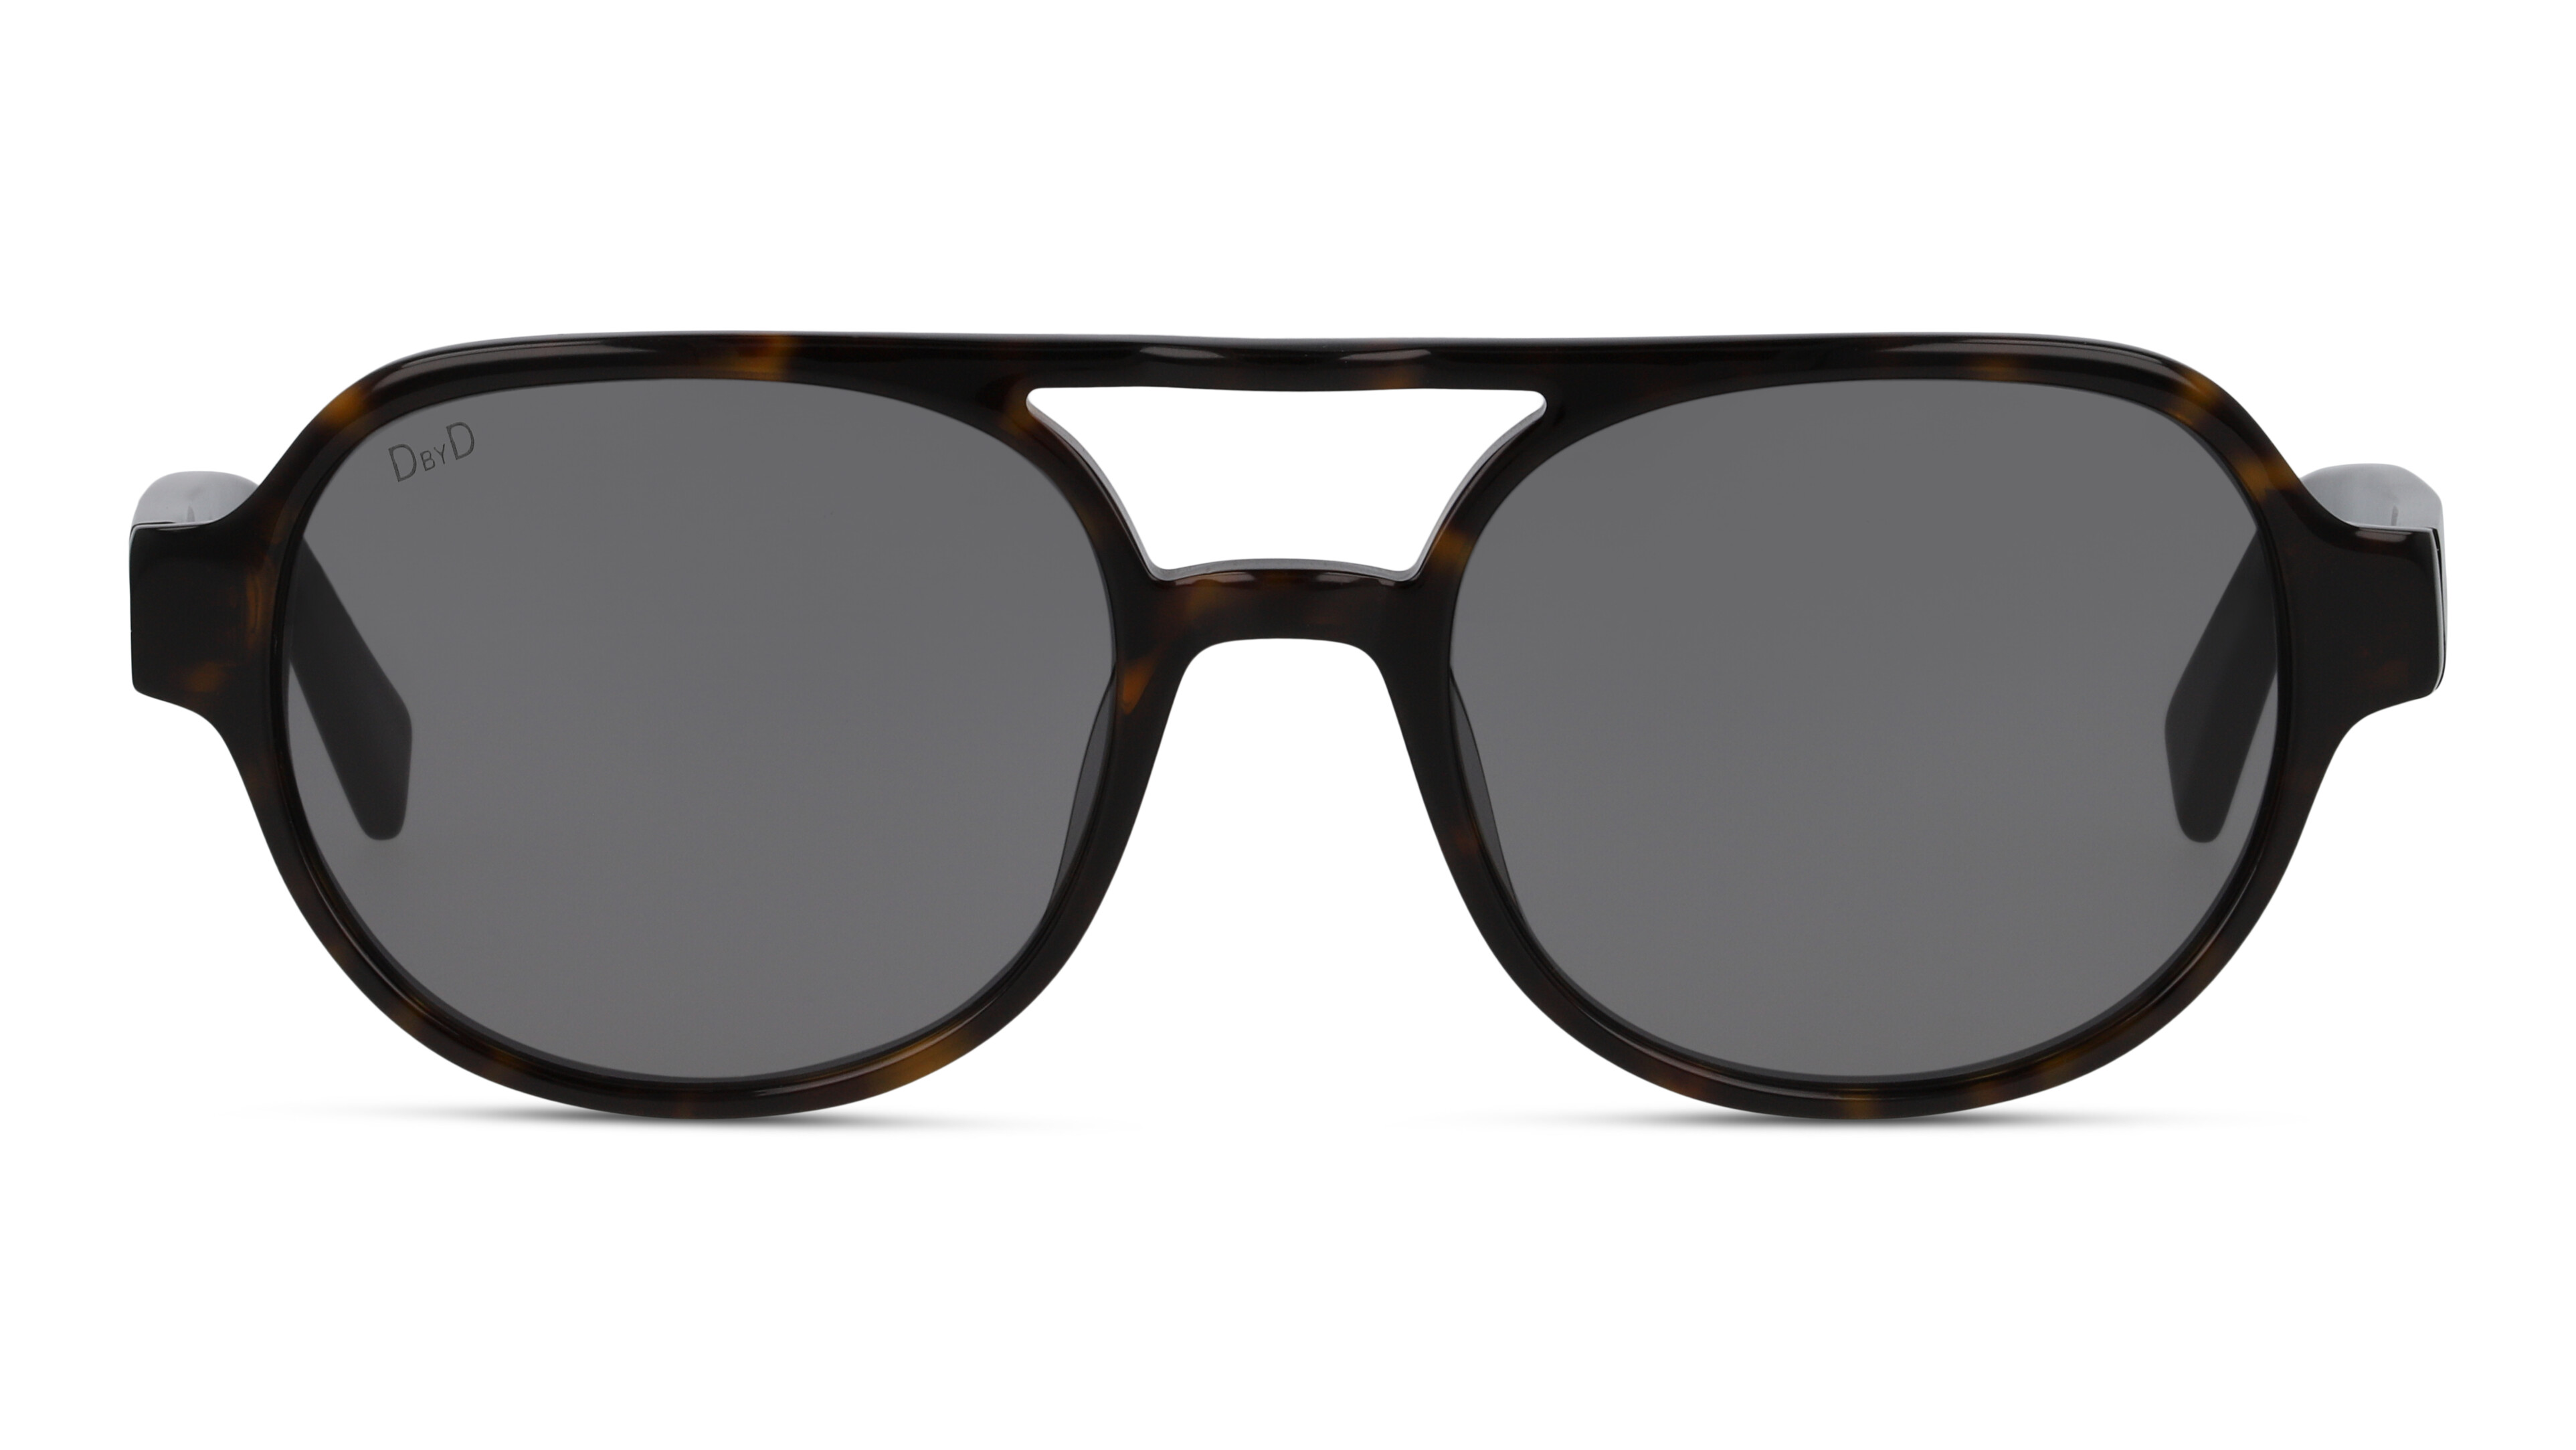 [products.image.front] DbyD DBSM5004 HHG0 Sonnenbrille